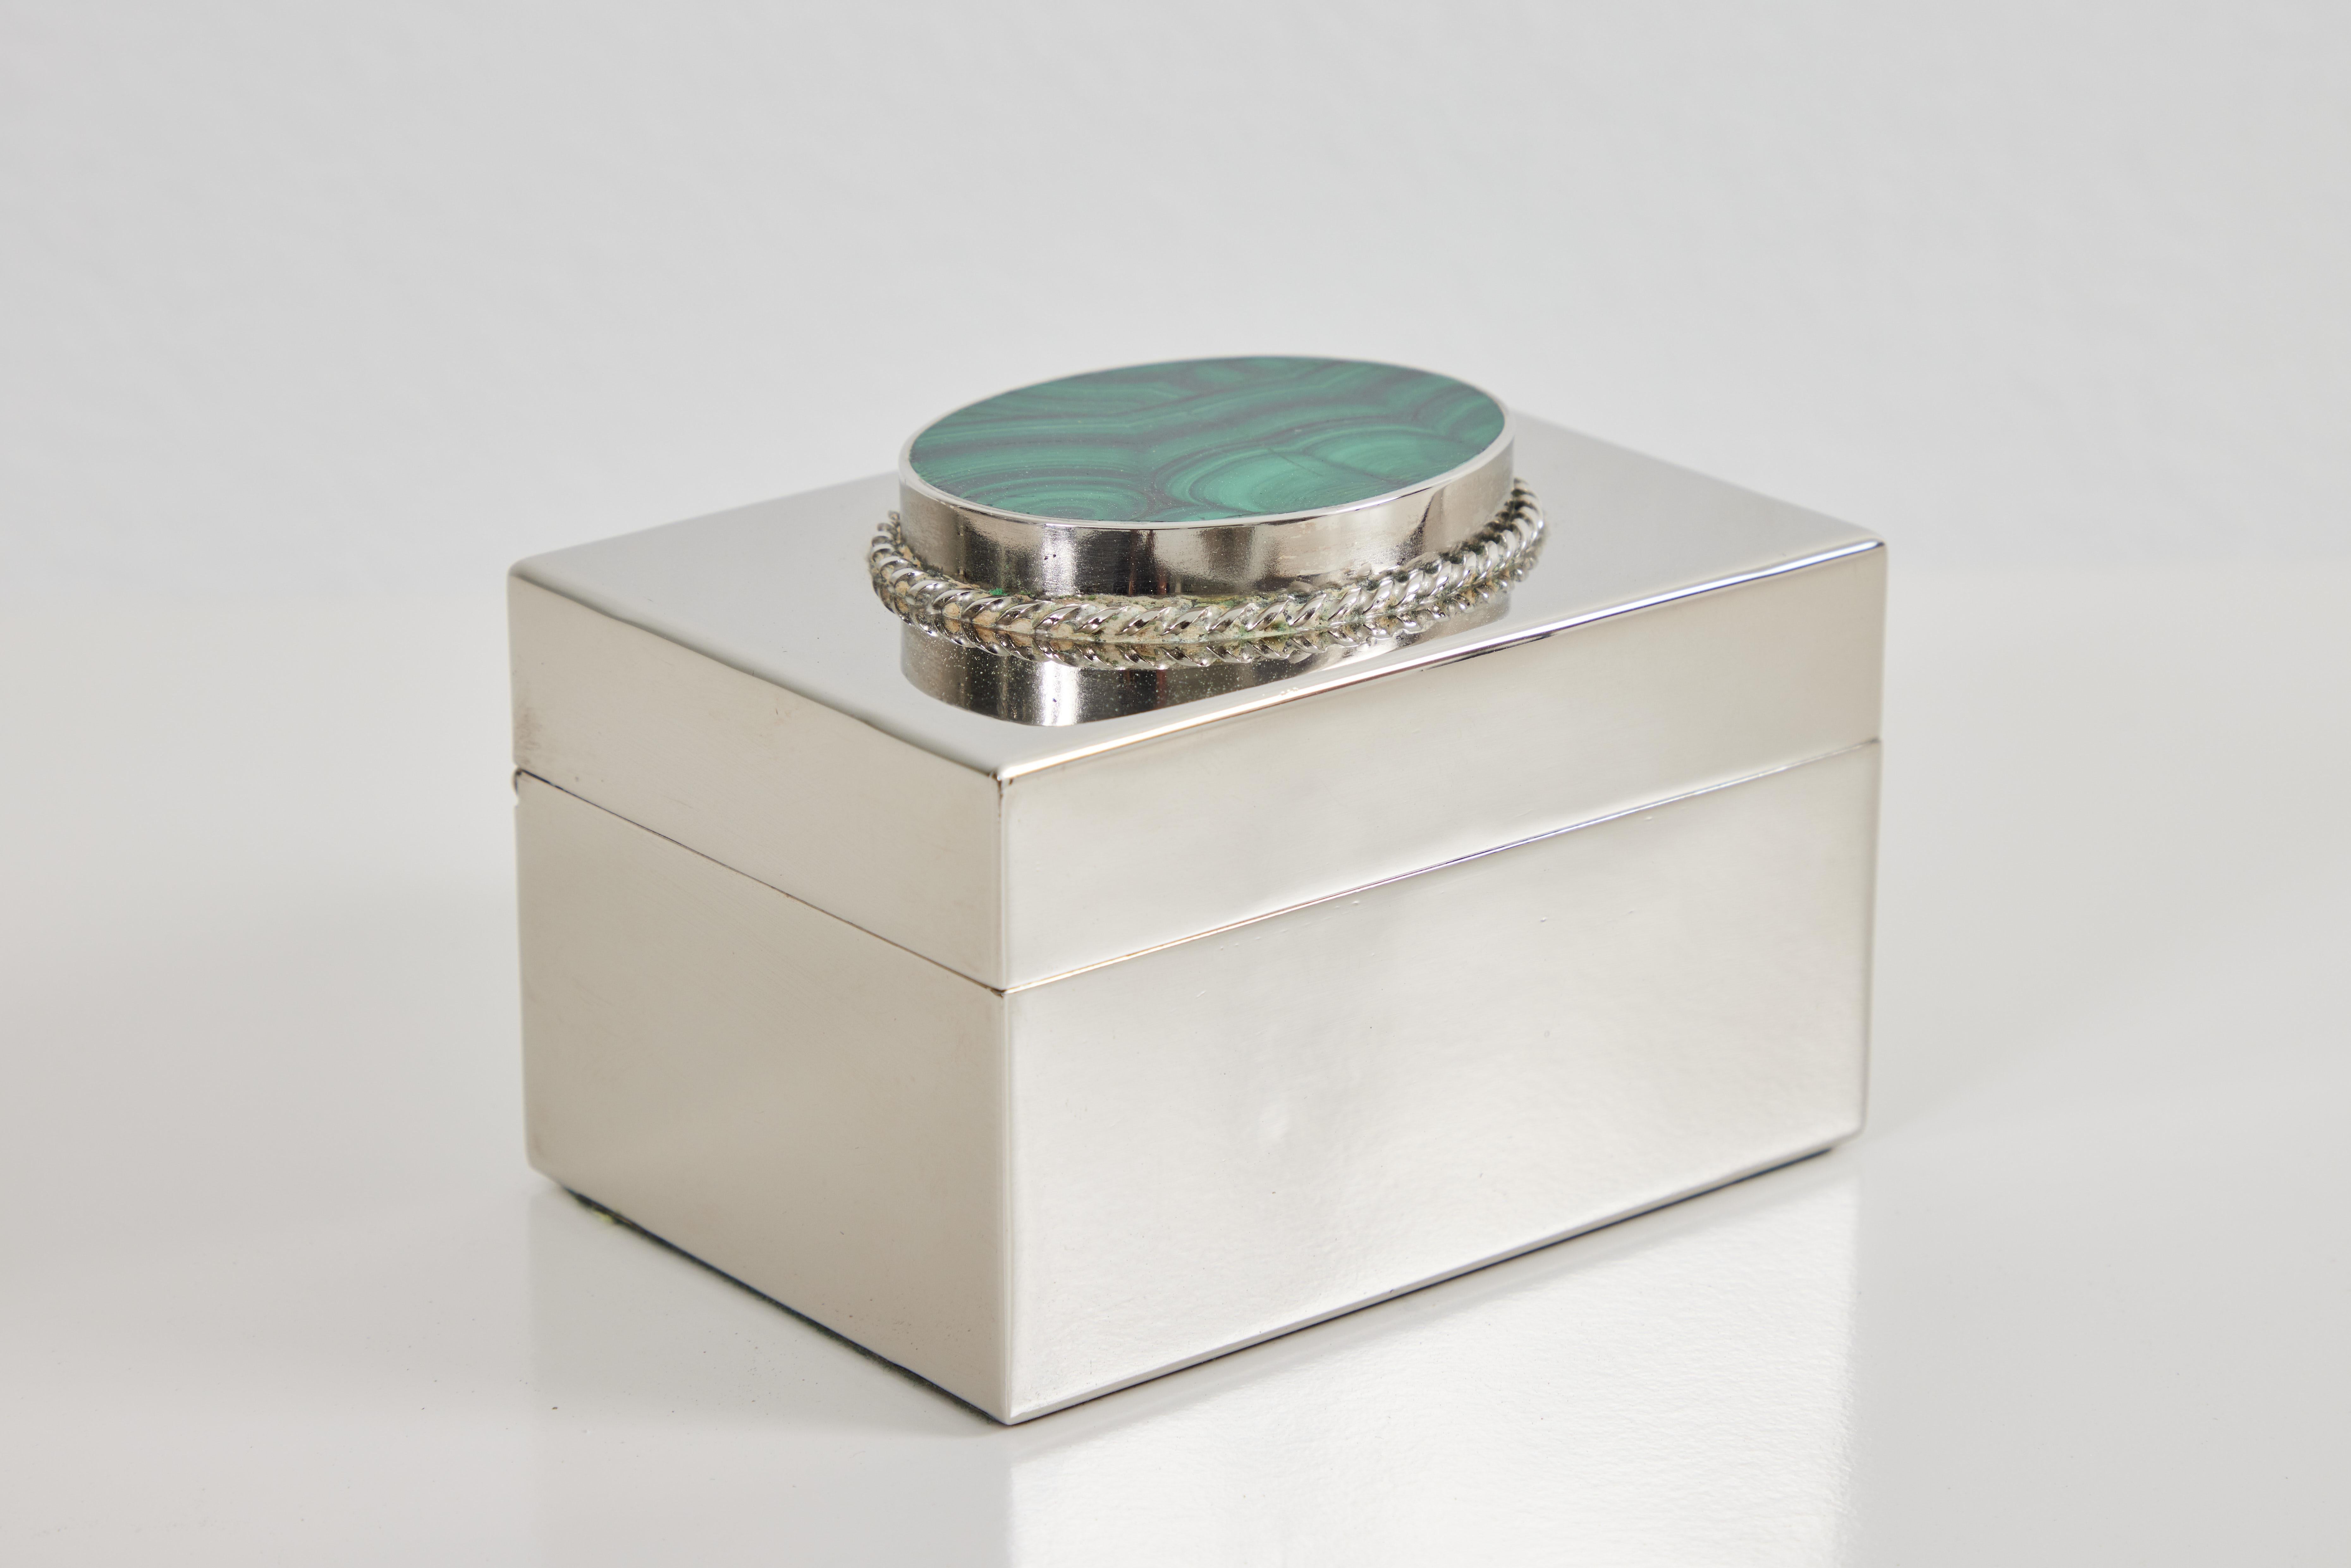 This Antony Redmile lidded box is hinged and is set with an oval piece of malachite on the lid. The inside is lined with a pink velvet. The 'Redmile London'. signature is impressed to the back of the box. 
Antony Redmile was a highly successful